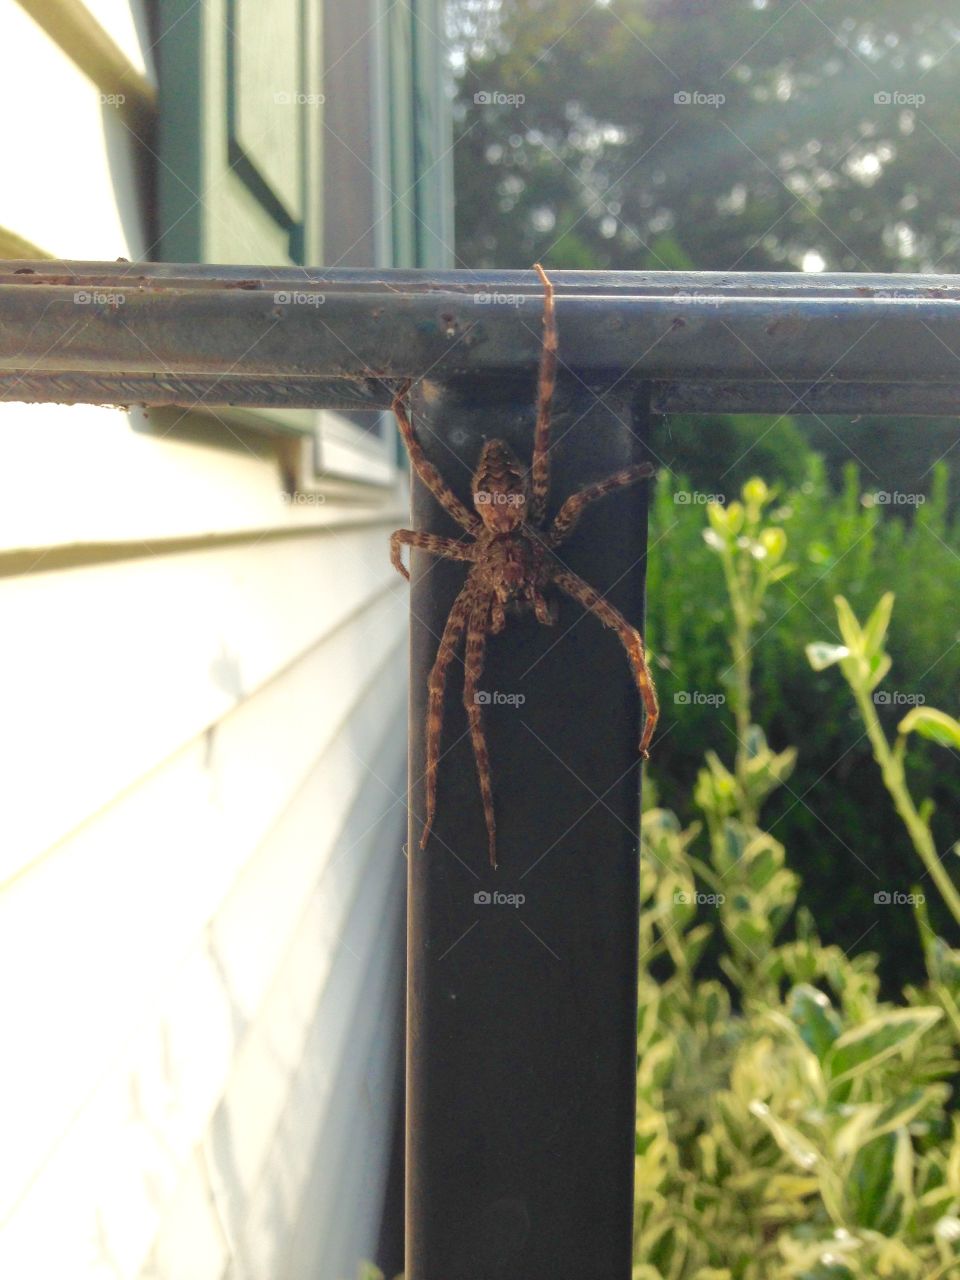 Amazing Spider. This was one of the biggest spiders I'd ever seen, and right on my deck D: